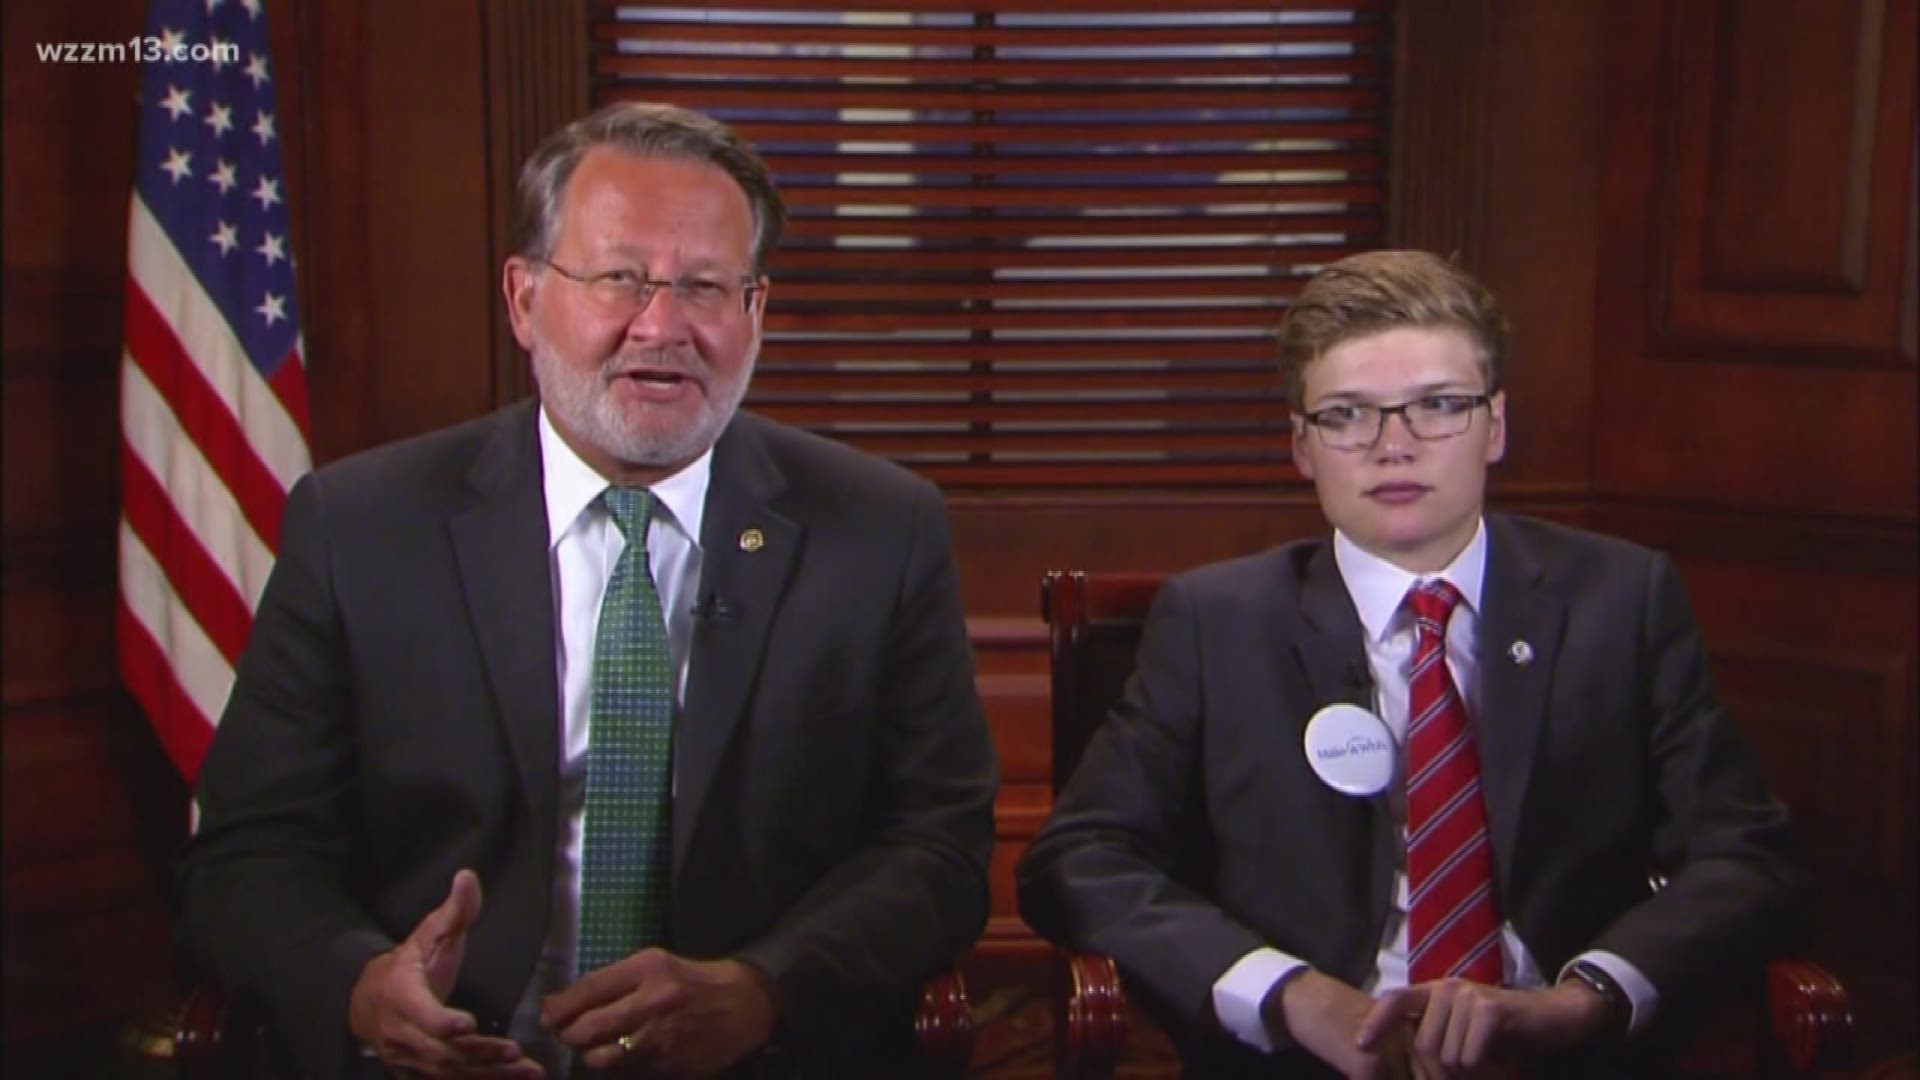 One Good Thing: Gary Peters and Make-A-Wish